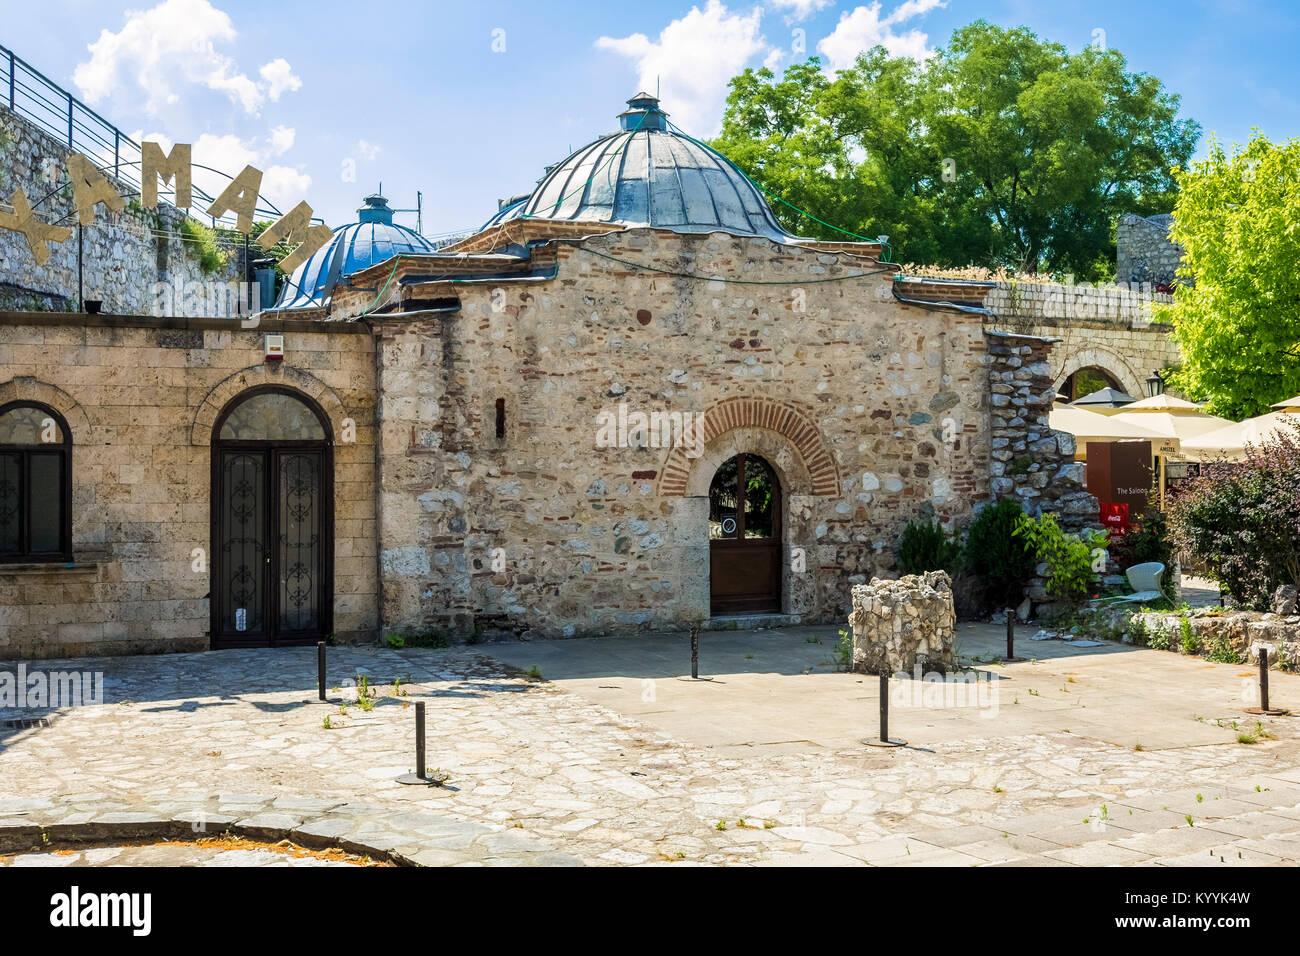 The Hamam (Old Turkish Baths), now a restaurant, in the Nis Fortress, Nis, Serbia Stock Photo